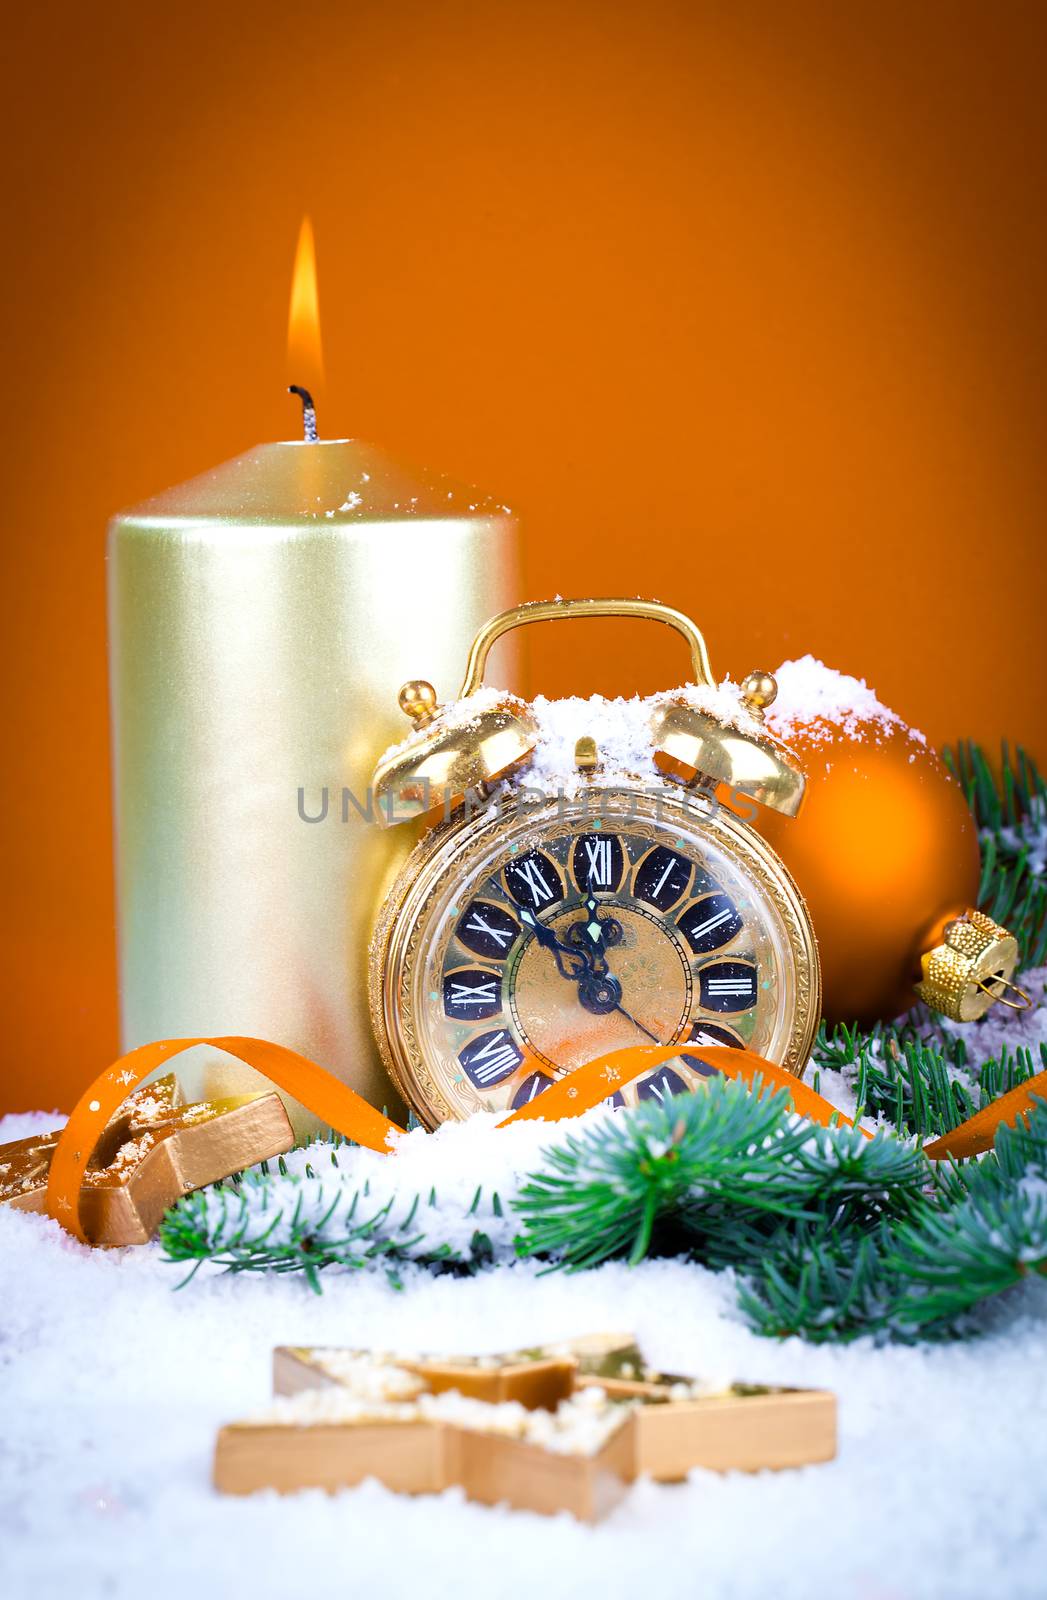 Christmas decorations - clock for the new year, candle, pine branch on orange background